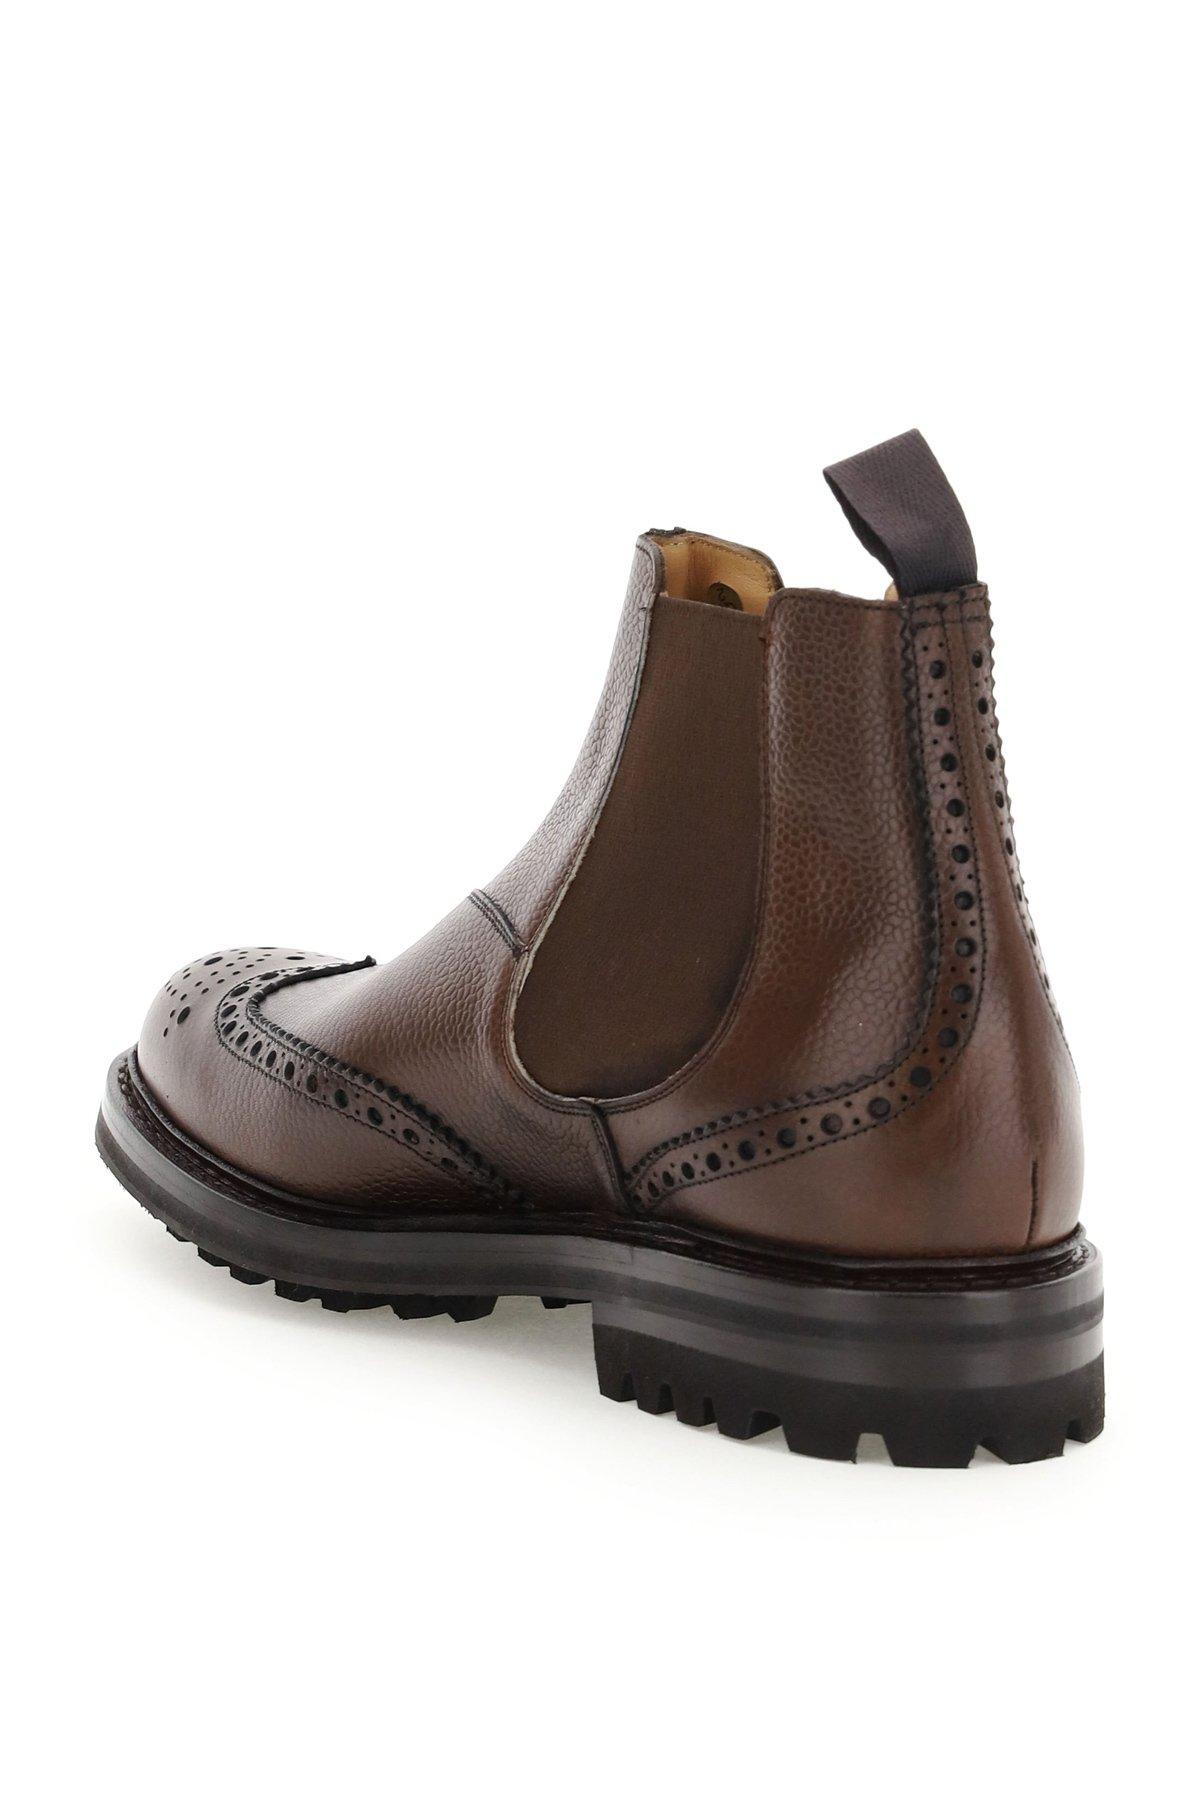 Church's Leather Mcentyre Lw Chelsea Boot in Brown for Men - Save 46% - Lyst